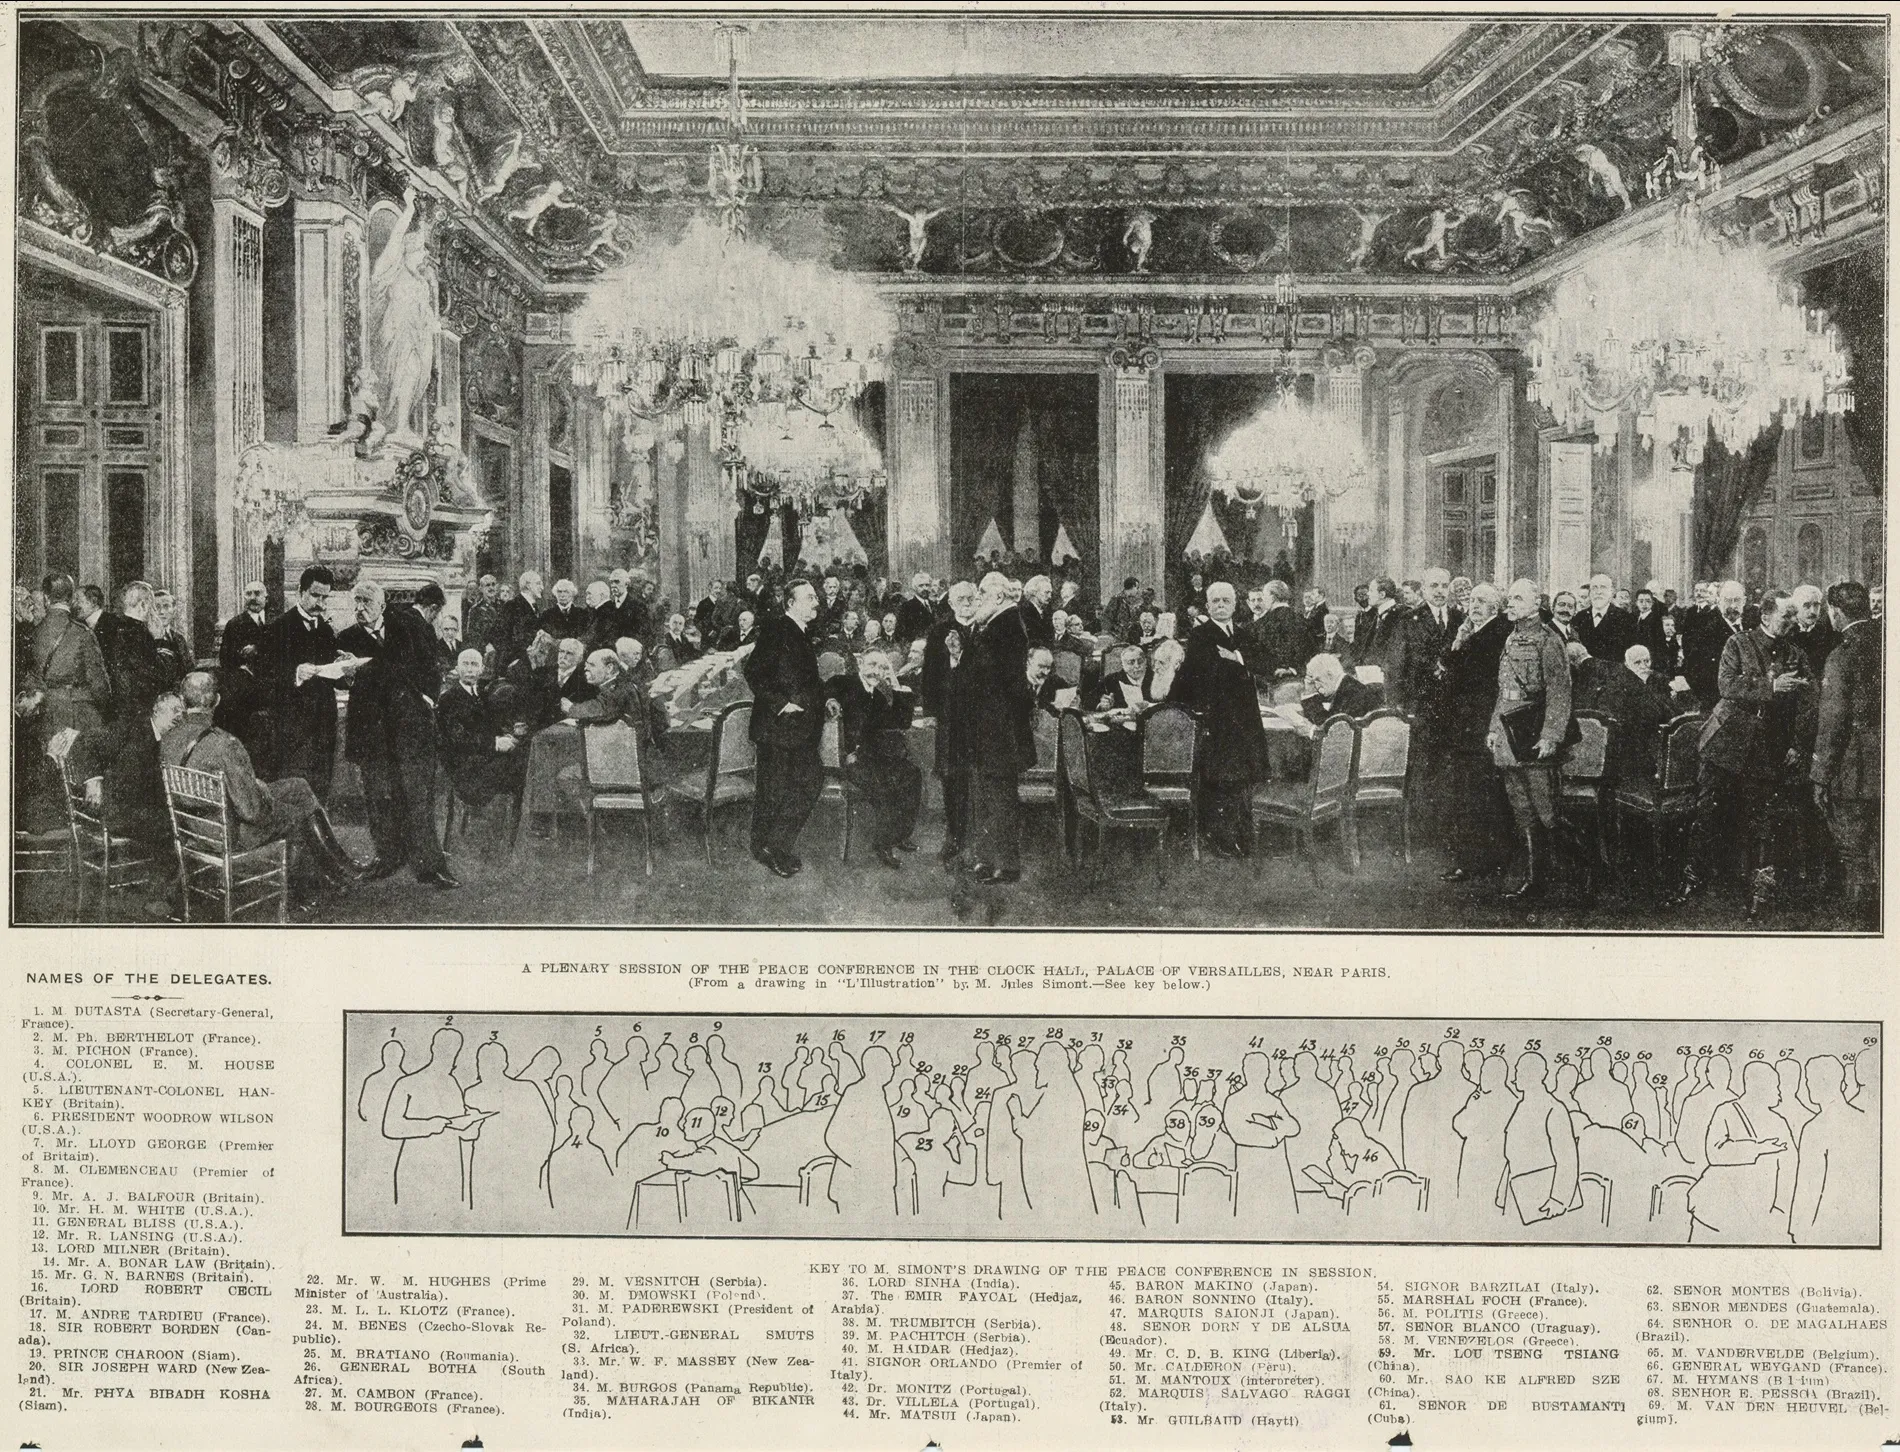 A newspaper clipping photograph of men in suits, delegates at the Paris Peach Conference, standing in a large decorated hall with chandeliers, statues and relief art.